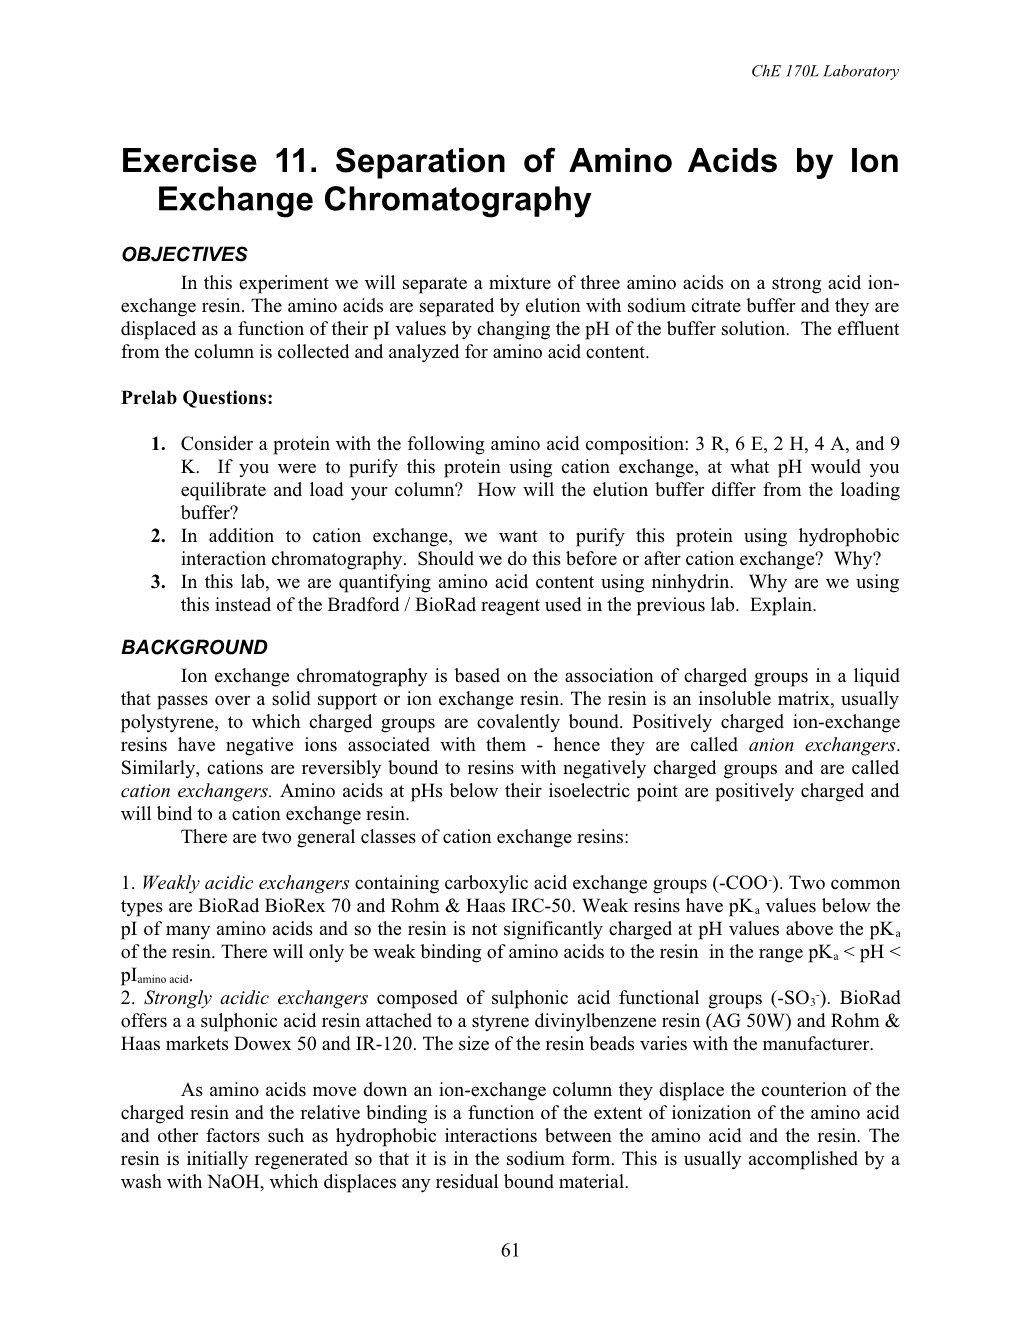 Exercise 11. Separation of Amino Acids by Ion Exchange Chromatography